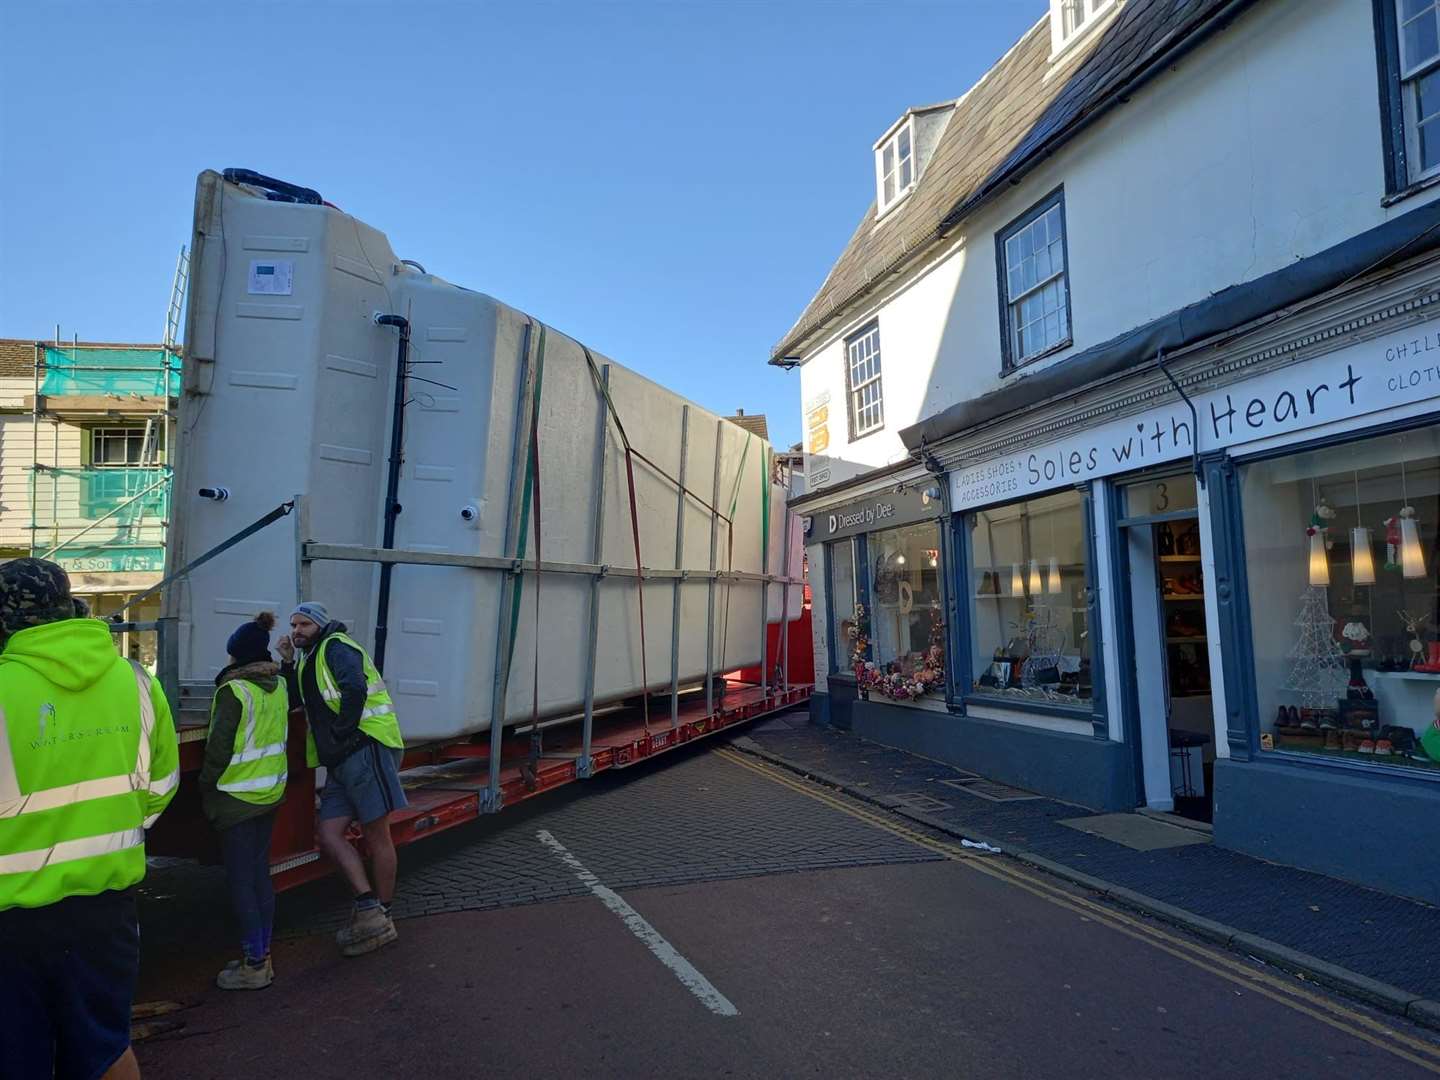 West Malling came to a standstill after the pool became wedged